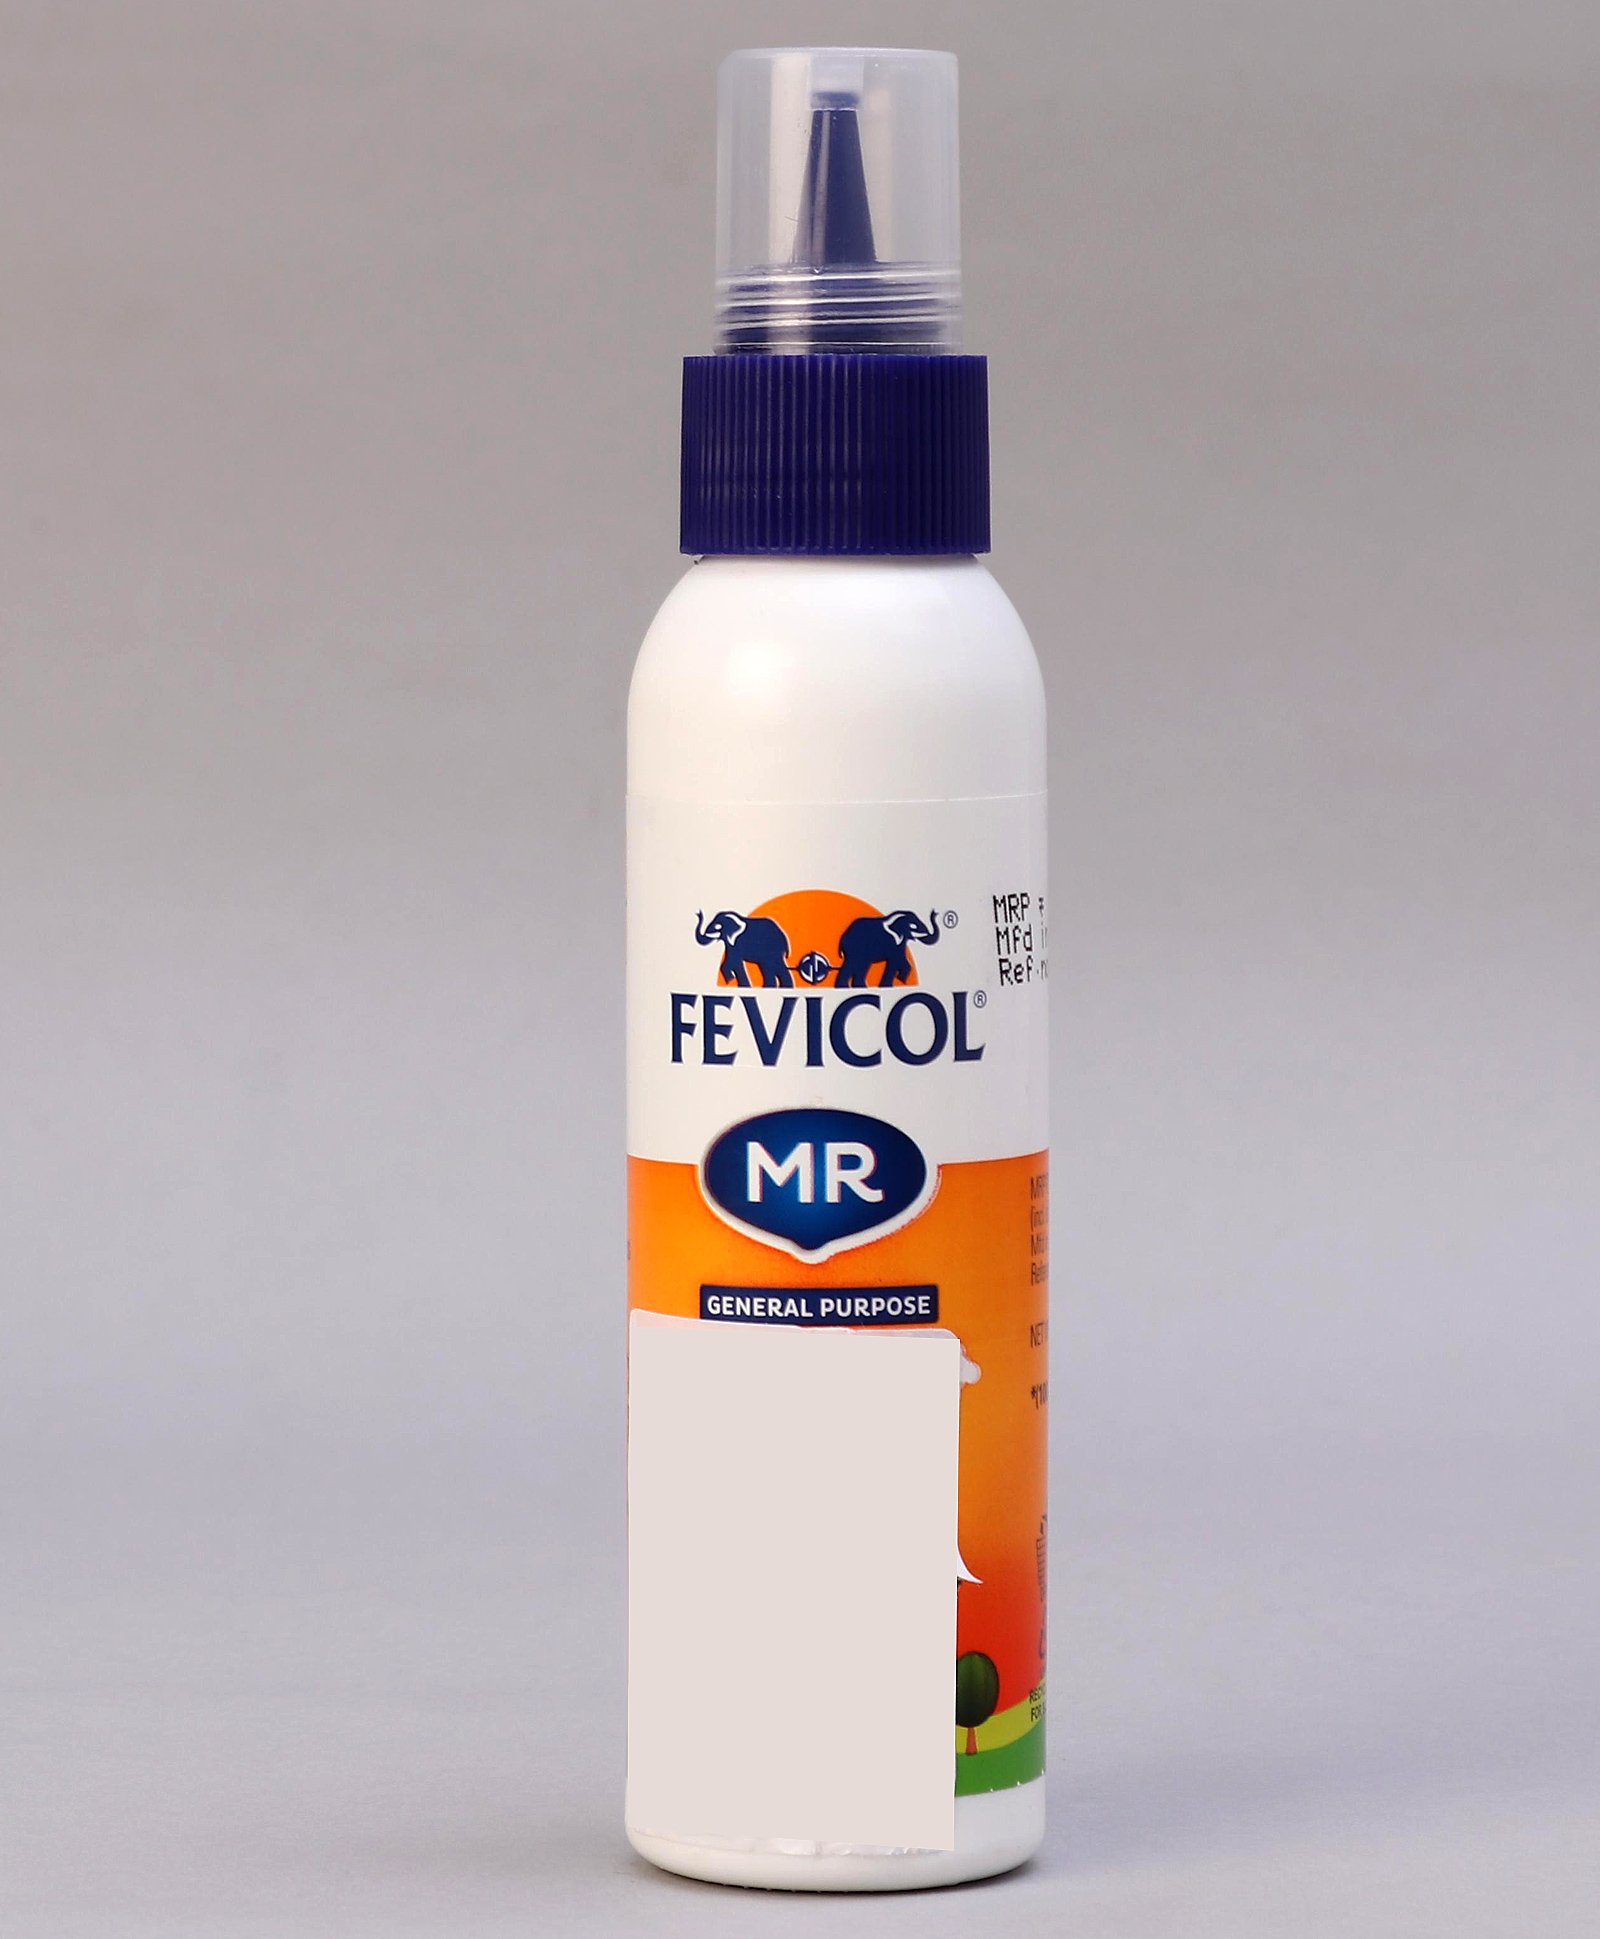 Fevicol Mr Squeeze Bottle, 100gm